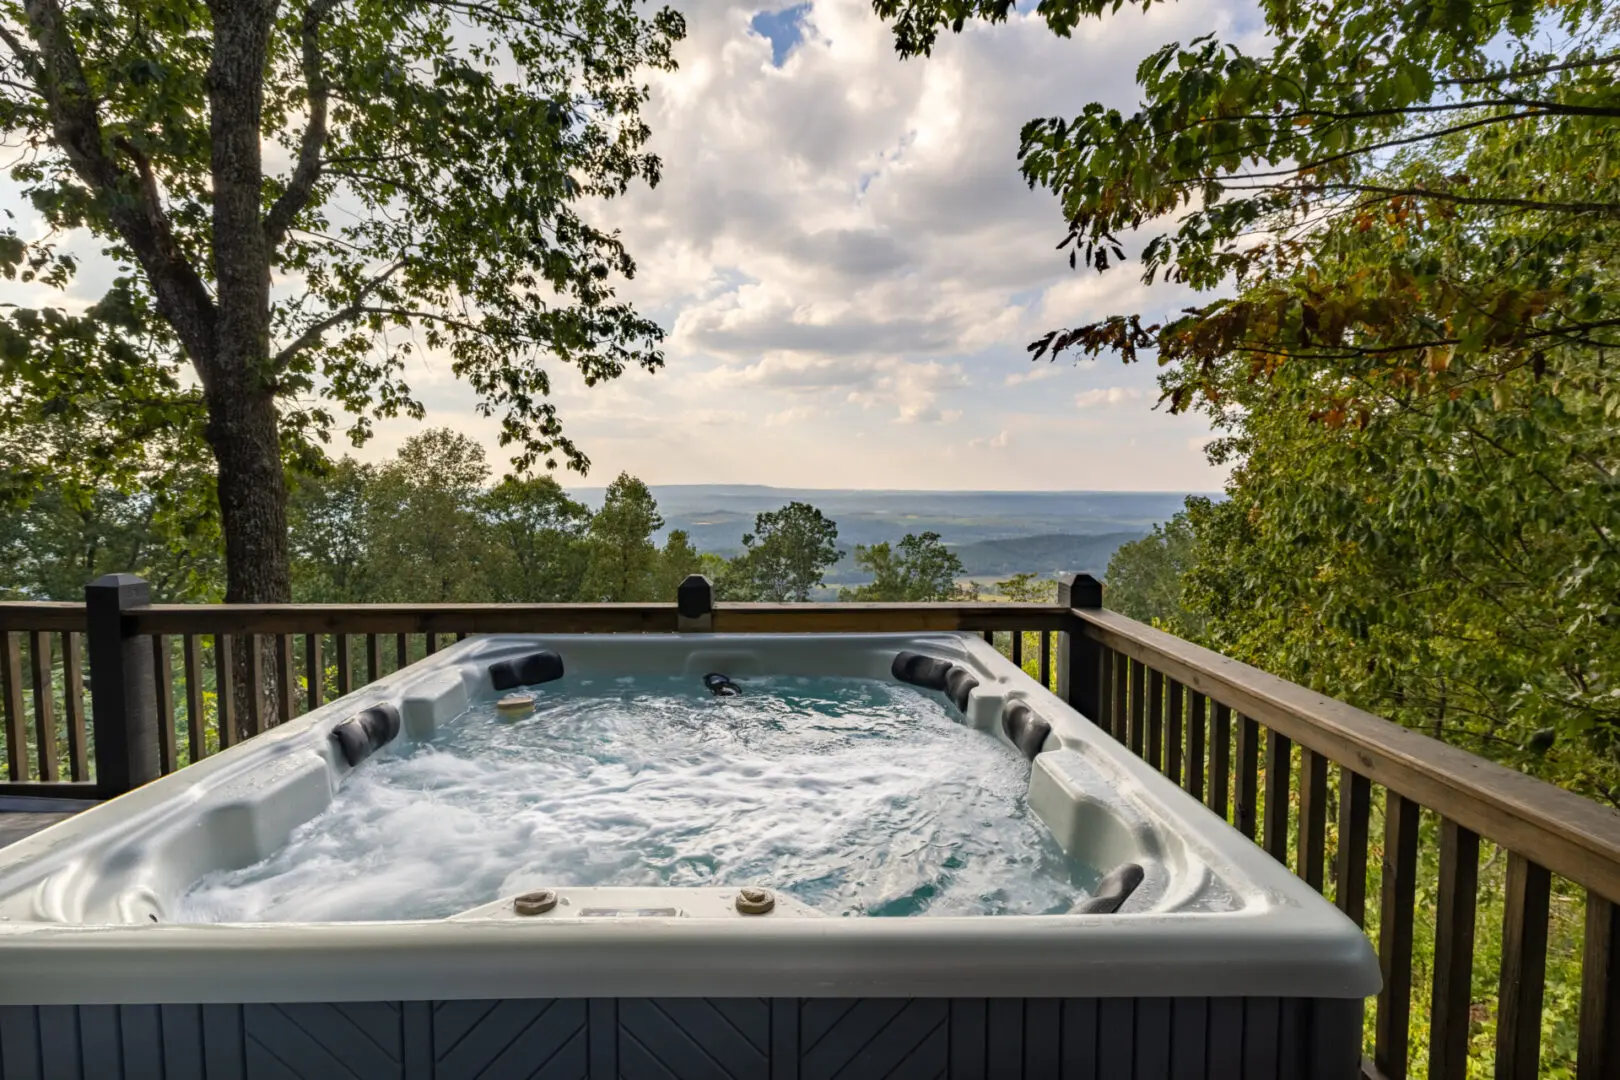 A hot tub on a deck overlooking the mountains.